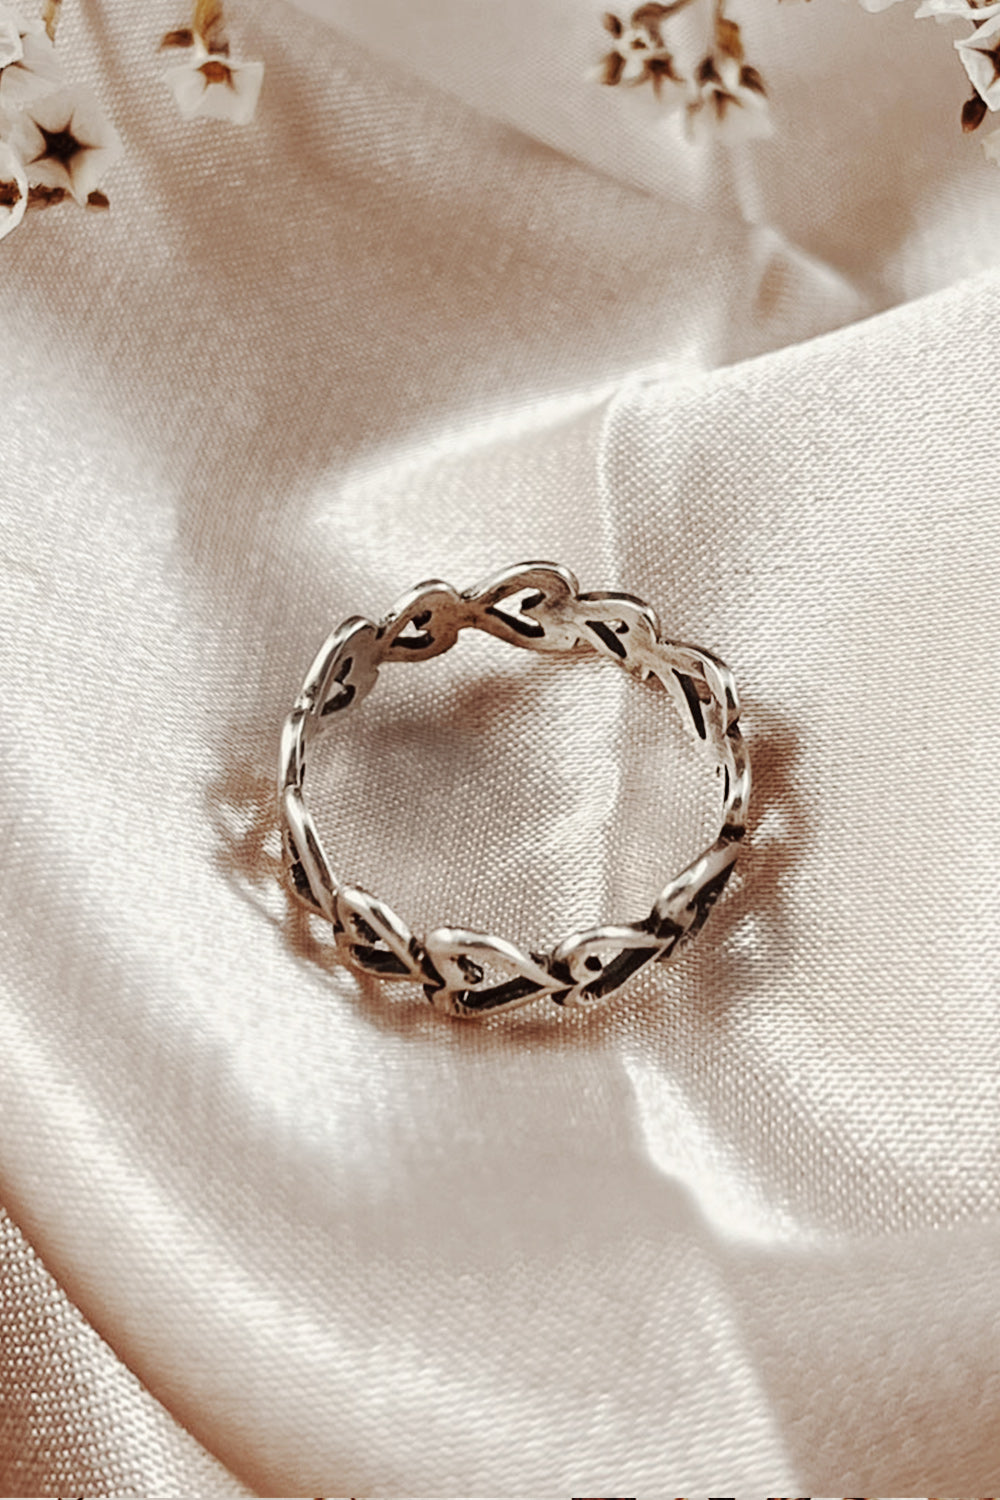 Sivalya Infinite Love Heart Band Ring Sterling Silver